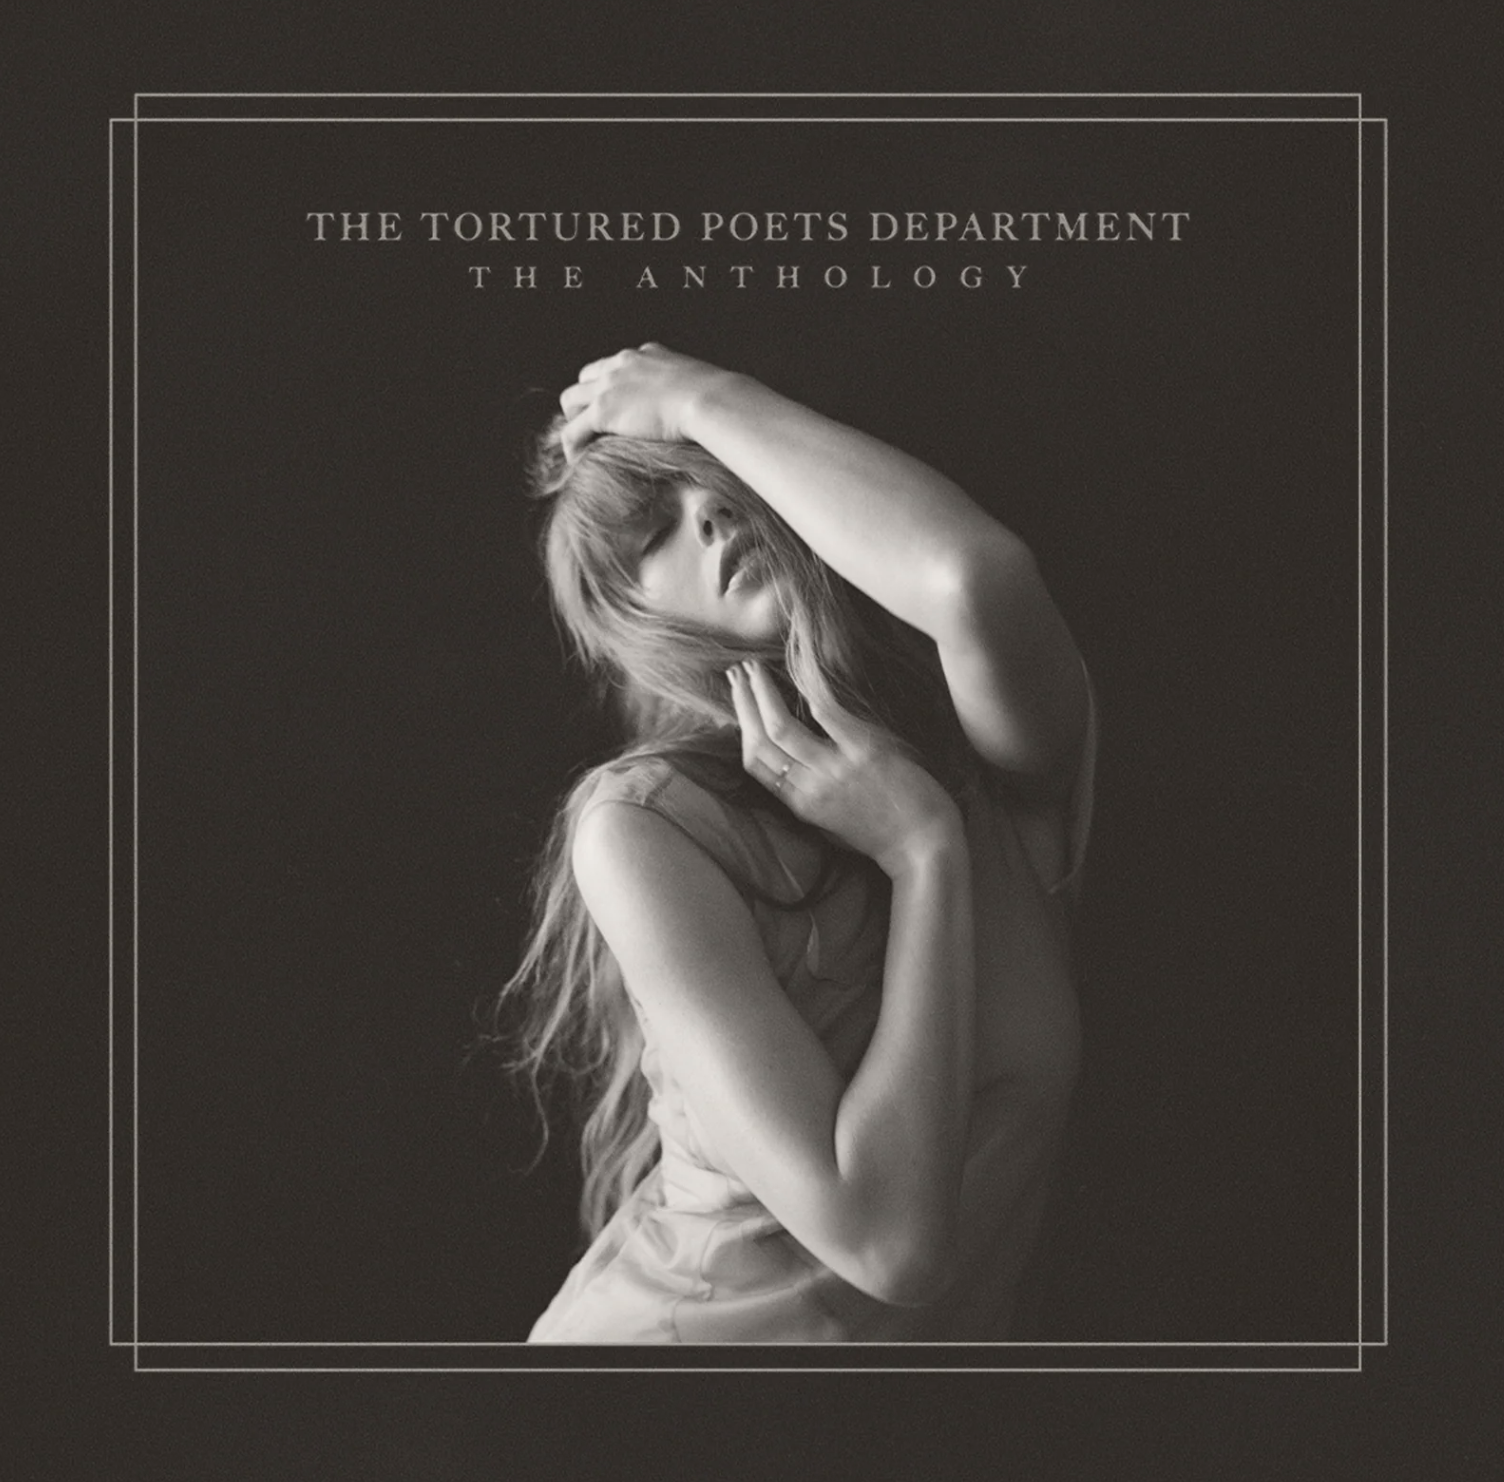 The album cover for Taylor Swift's The Tortured Poets Department The Anthology